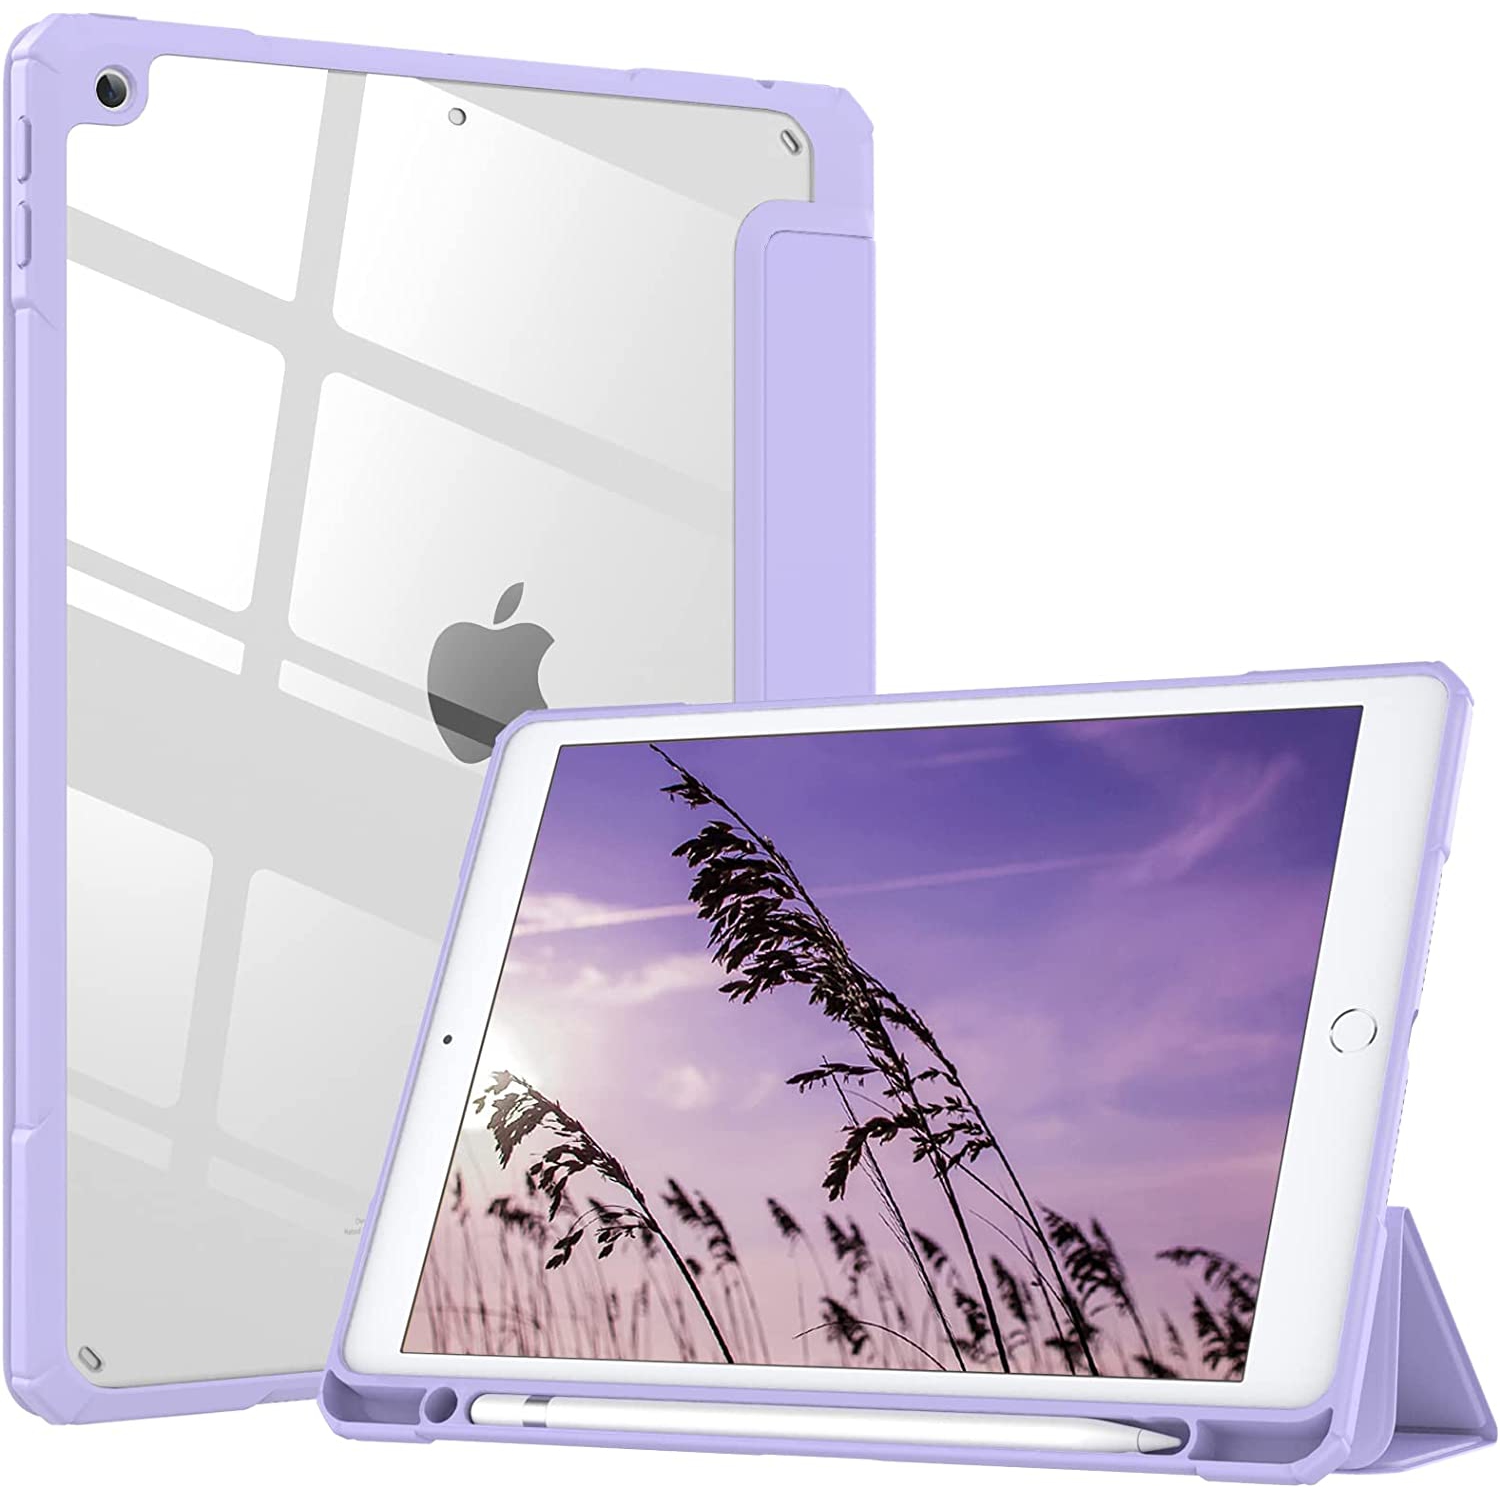 T Case for New iPad 9th Generation 2021/8th Gen 2020/7th Gen 2019 with Pencil Holder, Slim Protective Case with Clear Back Shell & Auto Wake/Sleep for iPad 10.2 Case, Taro Purple